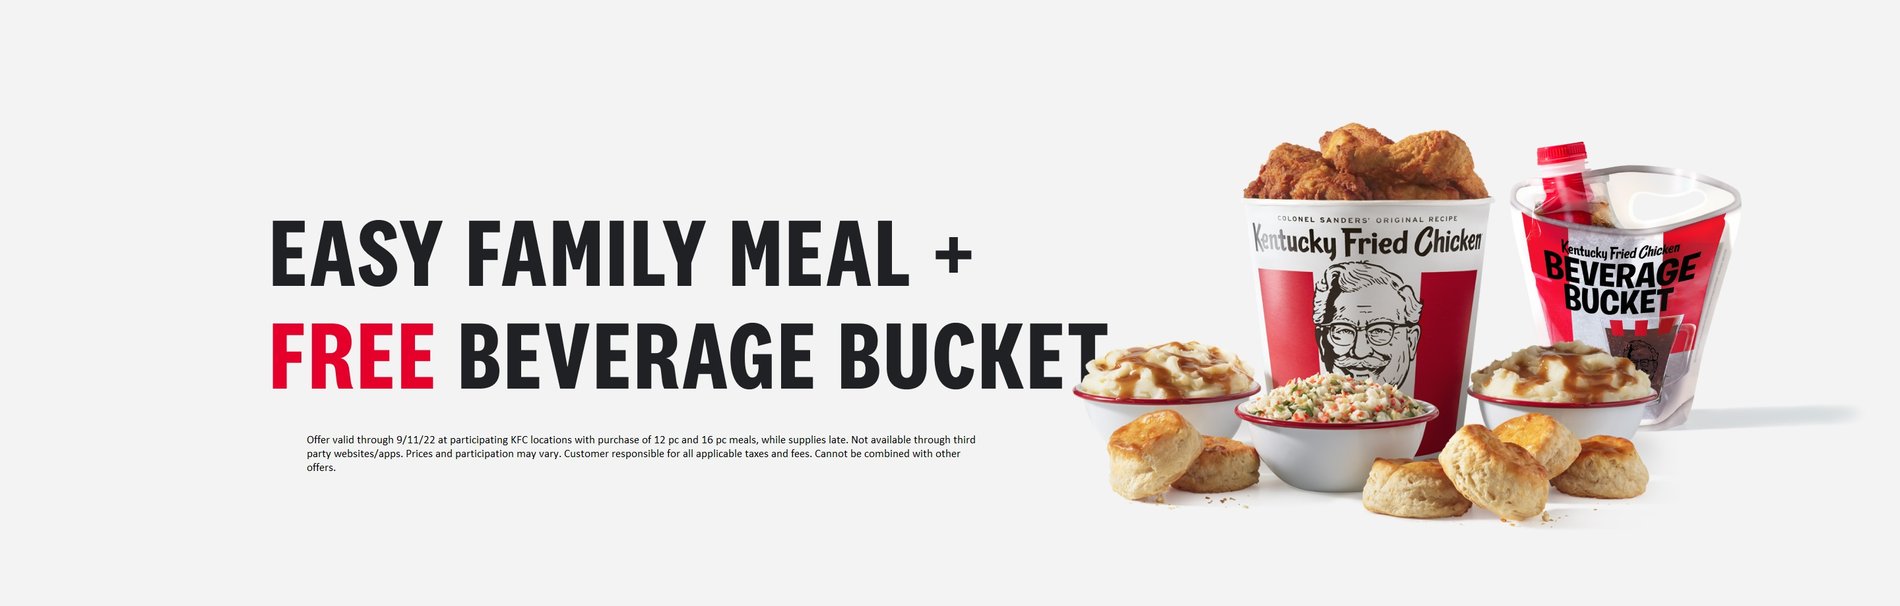 Easy family meal + free beverage bucket